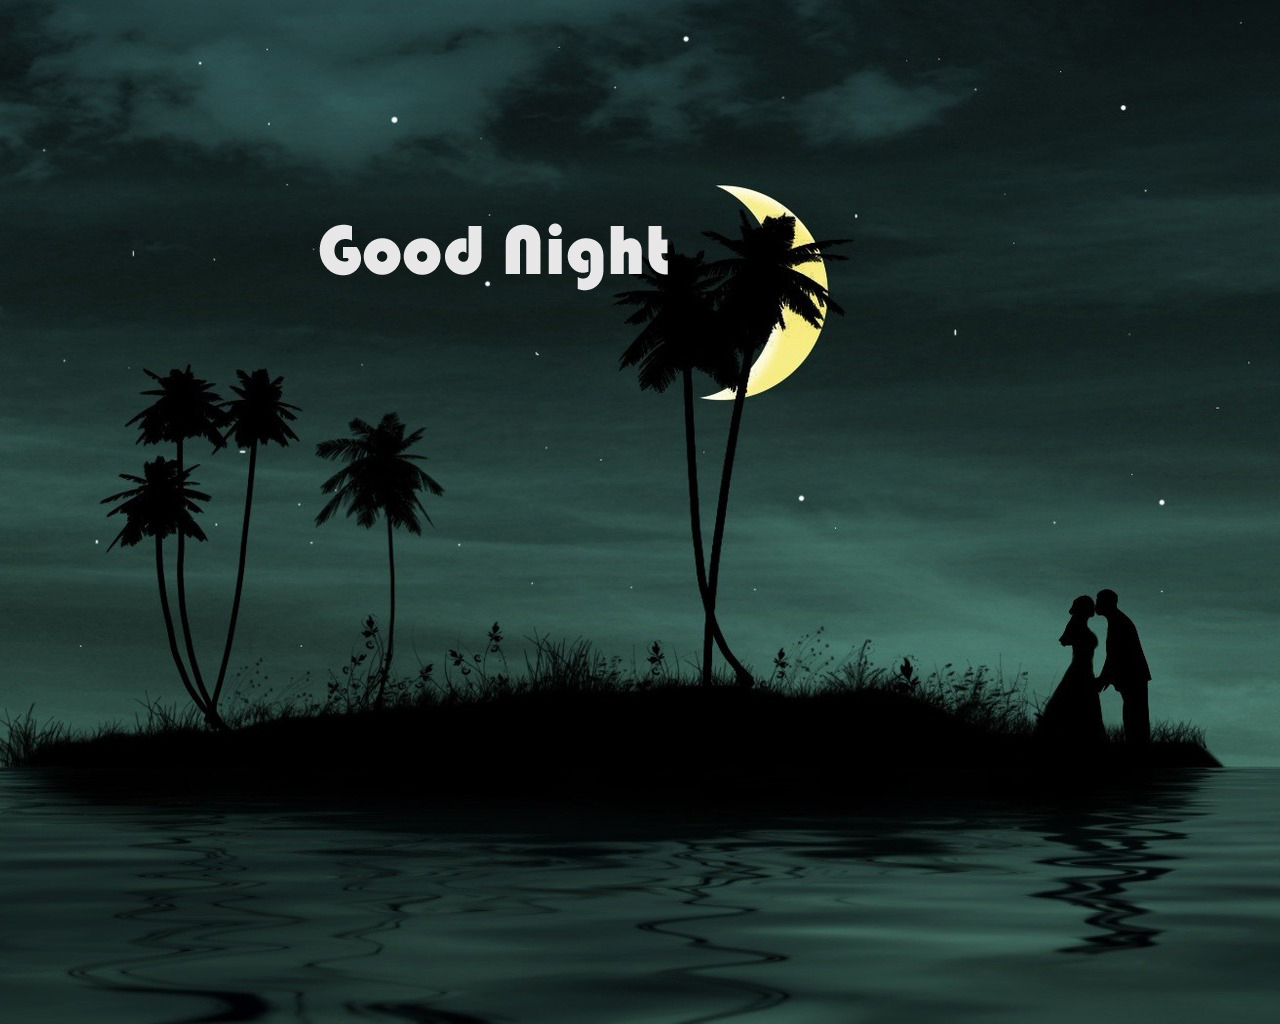 Good Night Girl Hd Wallpaper & Pictures - Romantic Wallpapers For Mobile - HD Wallpaper 